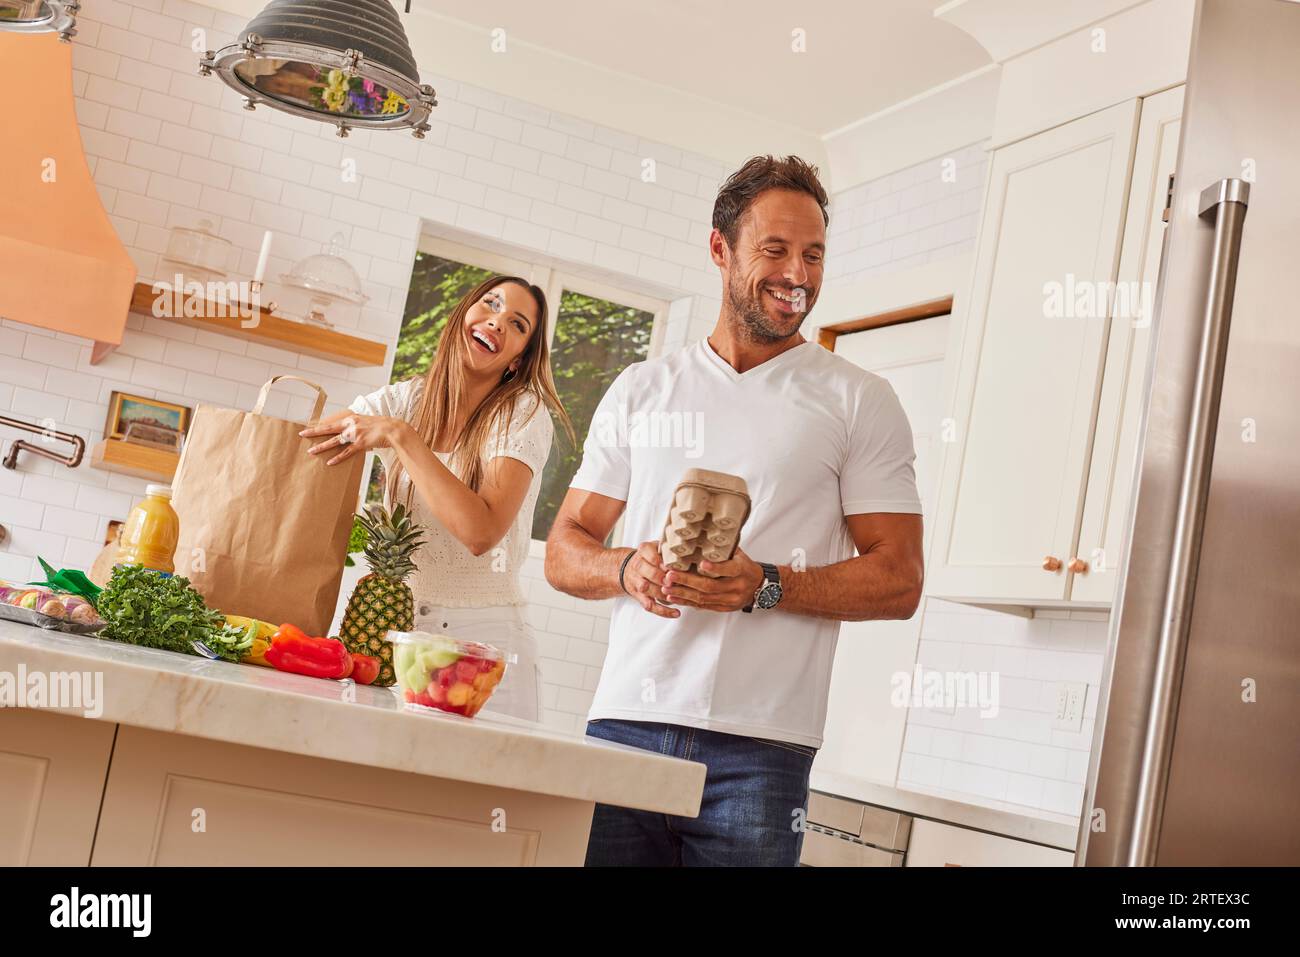 Smiling couple with paper shopping bag and groceries in kitchen Stock Photo